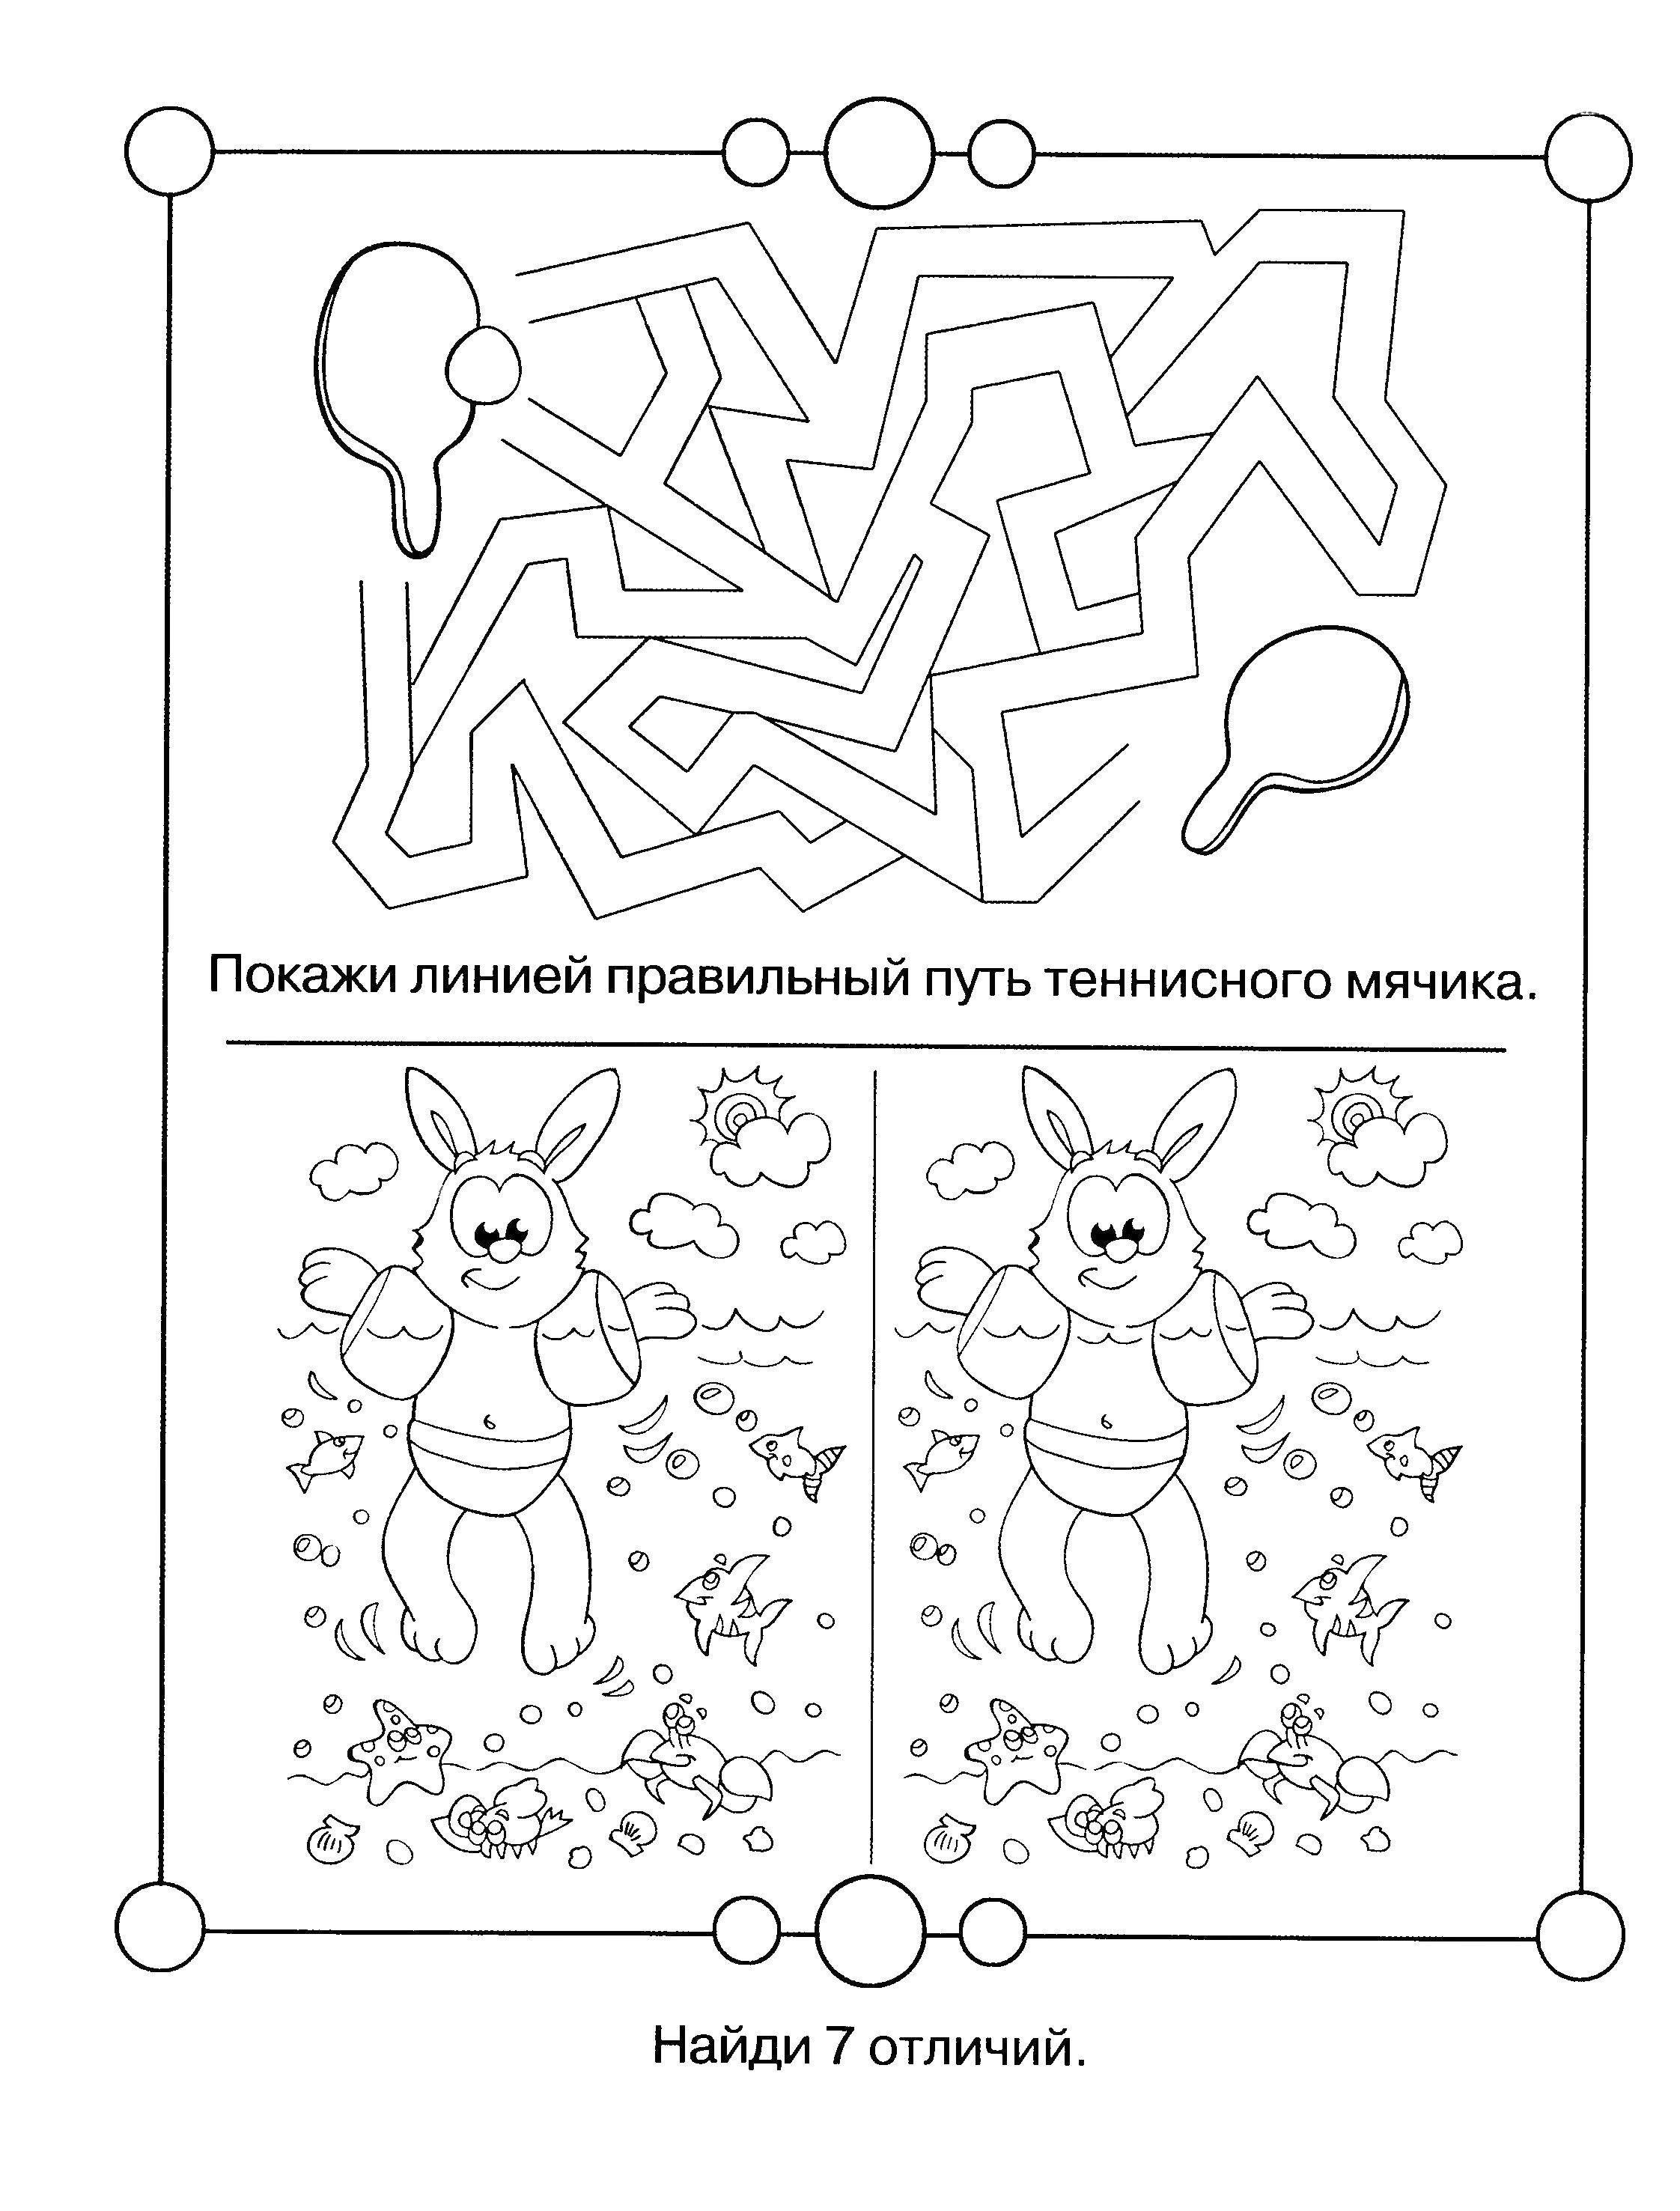 Coloring Maze.. Category riddles for kids. Tags:  Maze, logic.